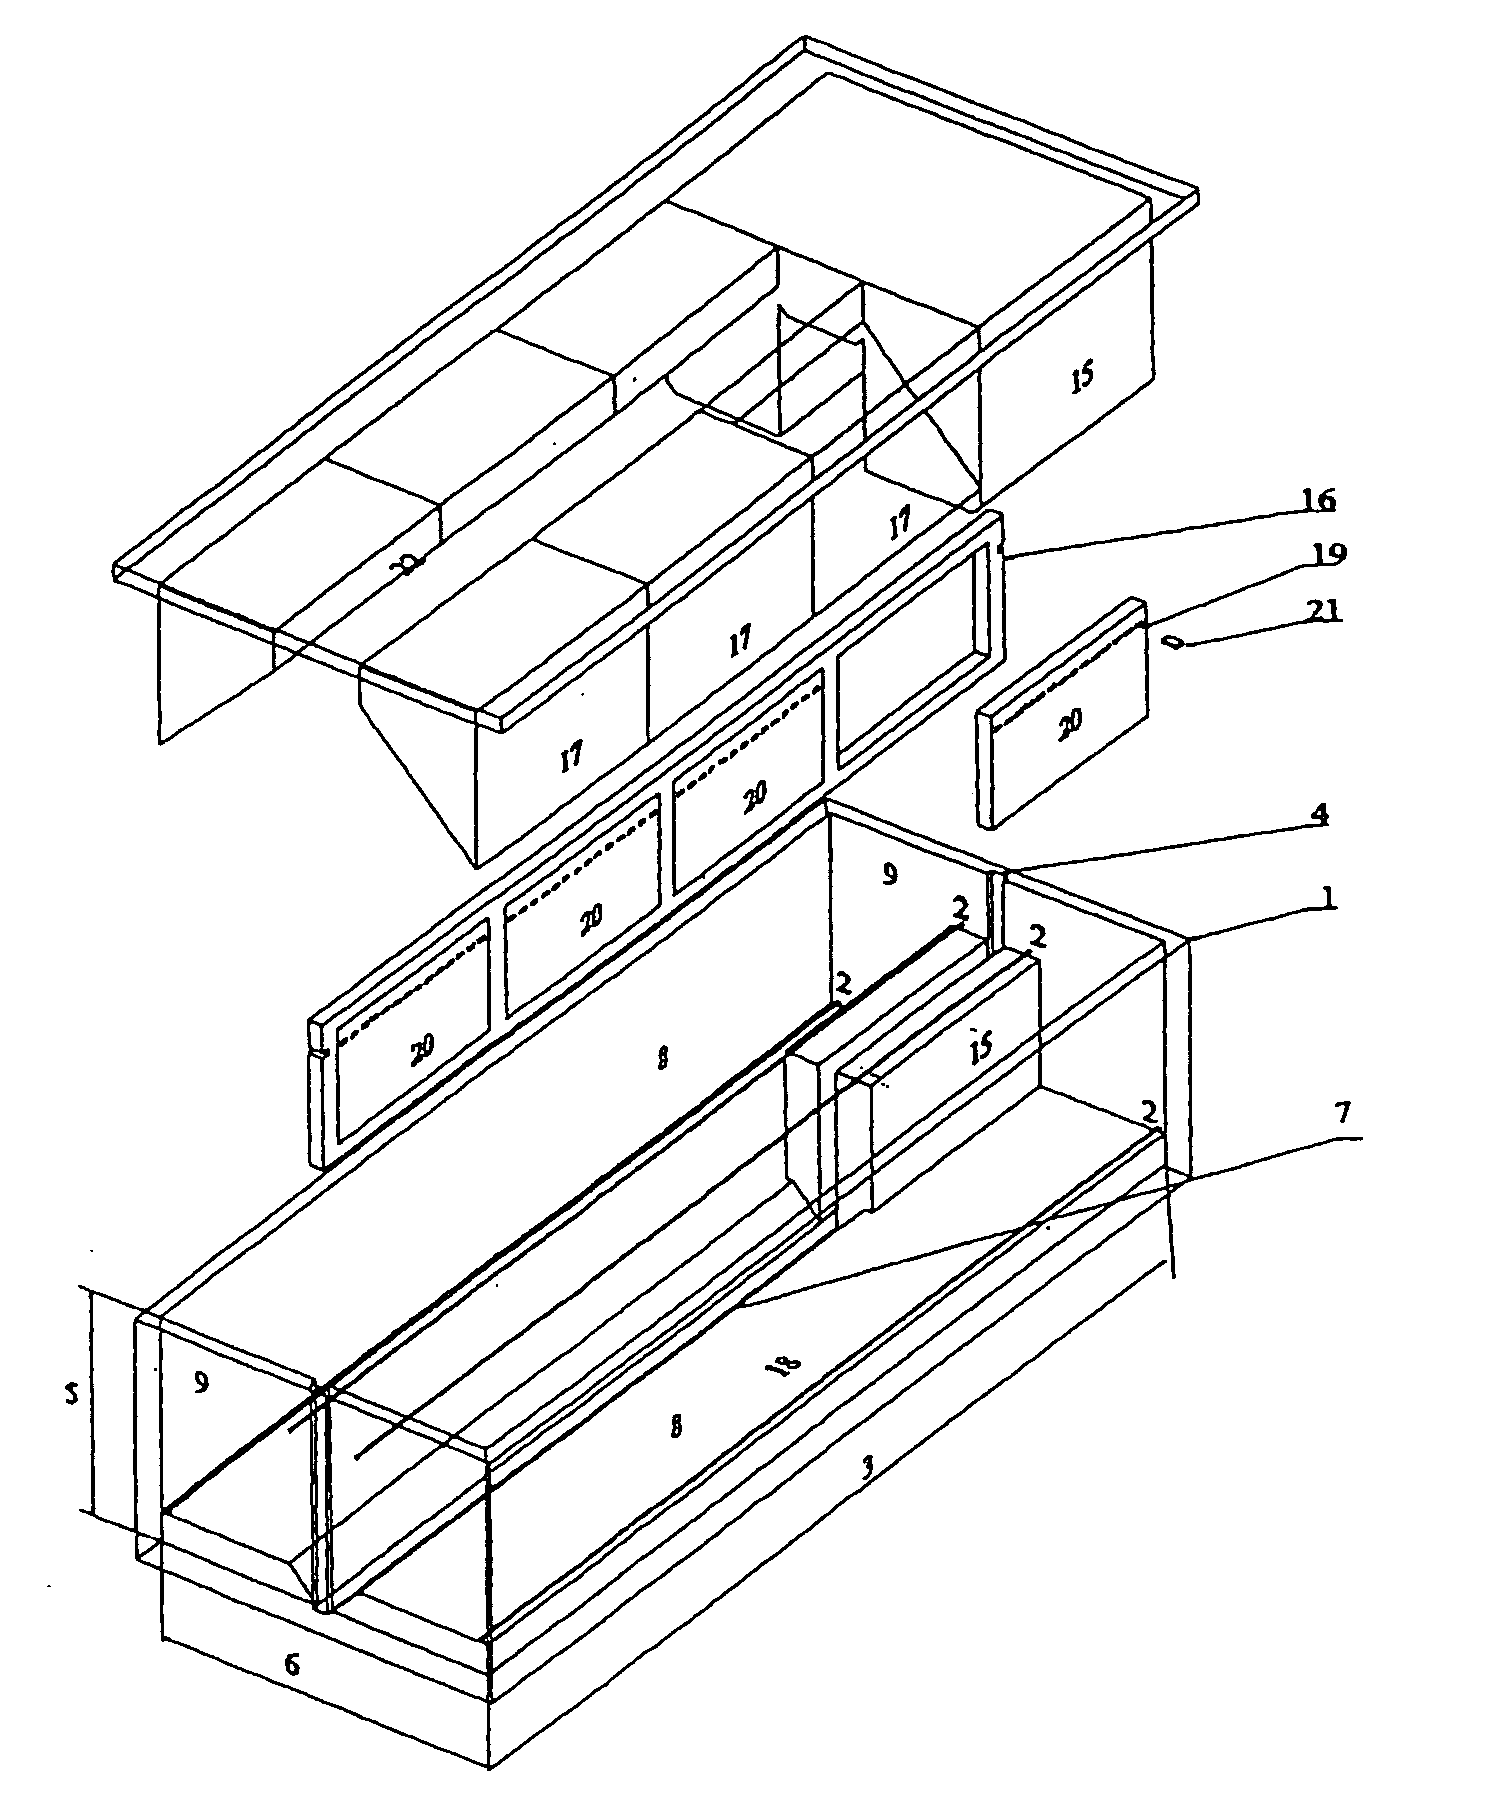 Pulsed Field Gel Electrophoresis chambers, accessories and methods of use for the separation of DNA molecules